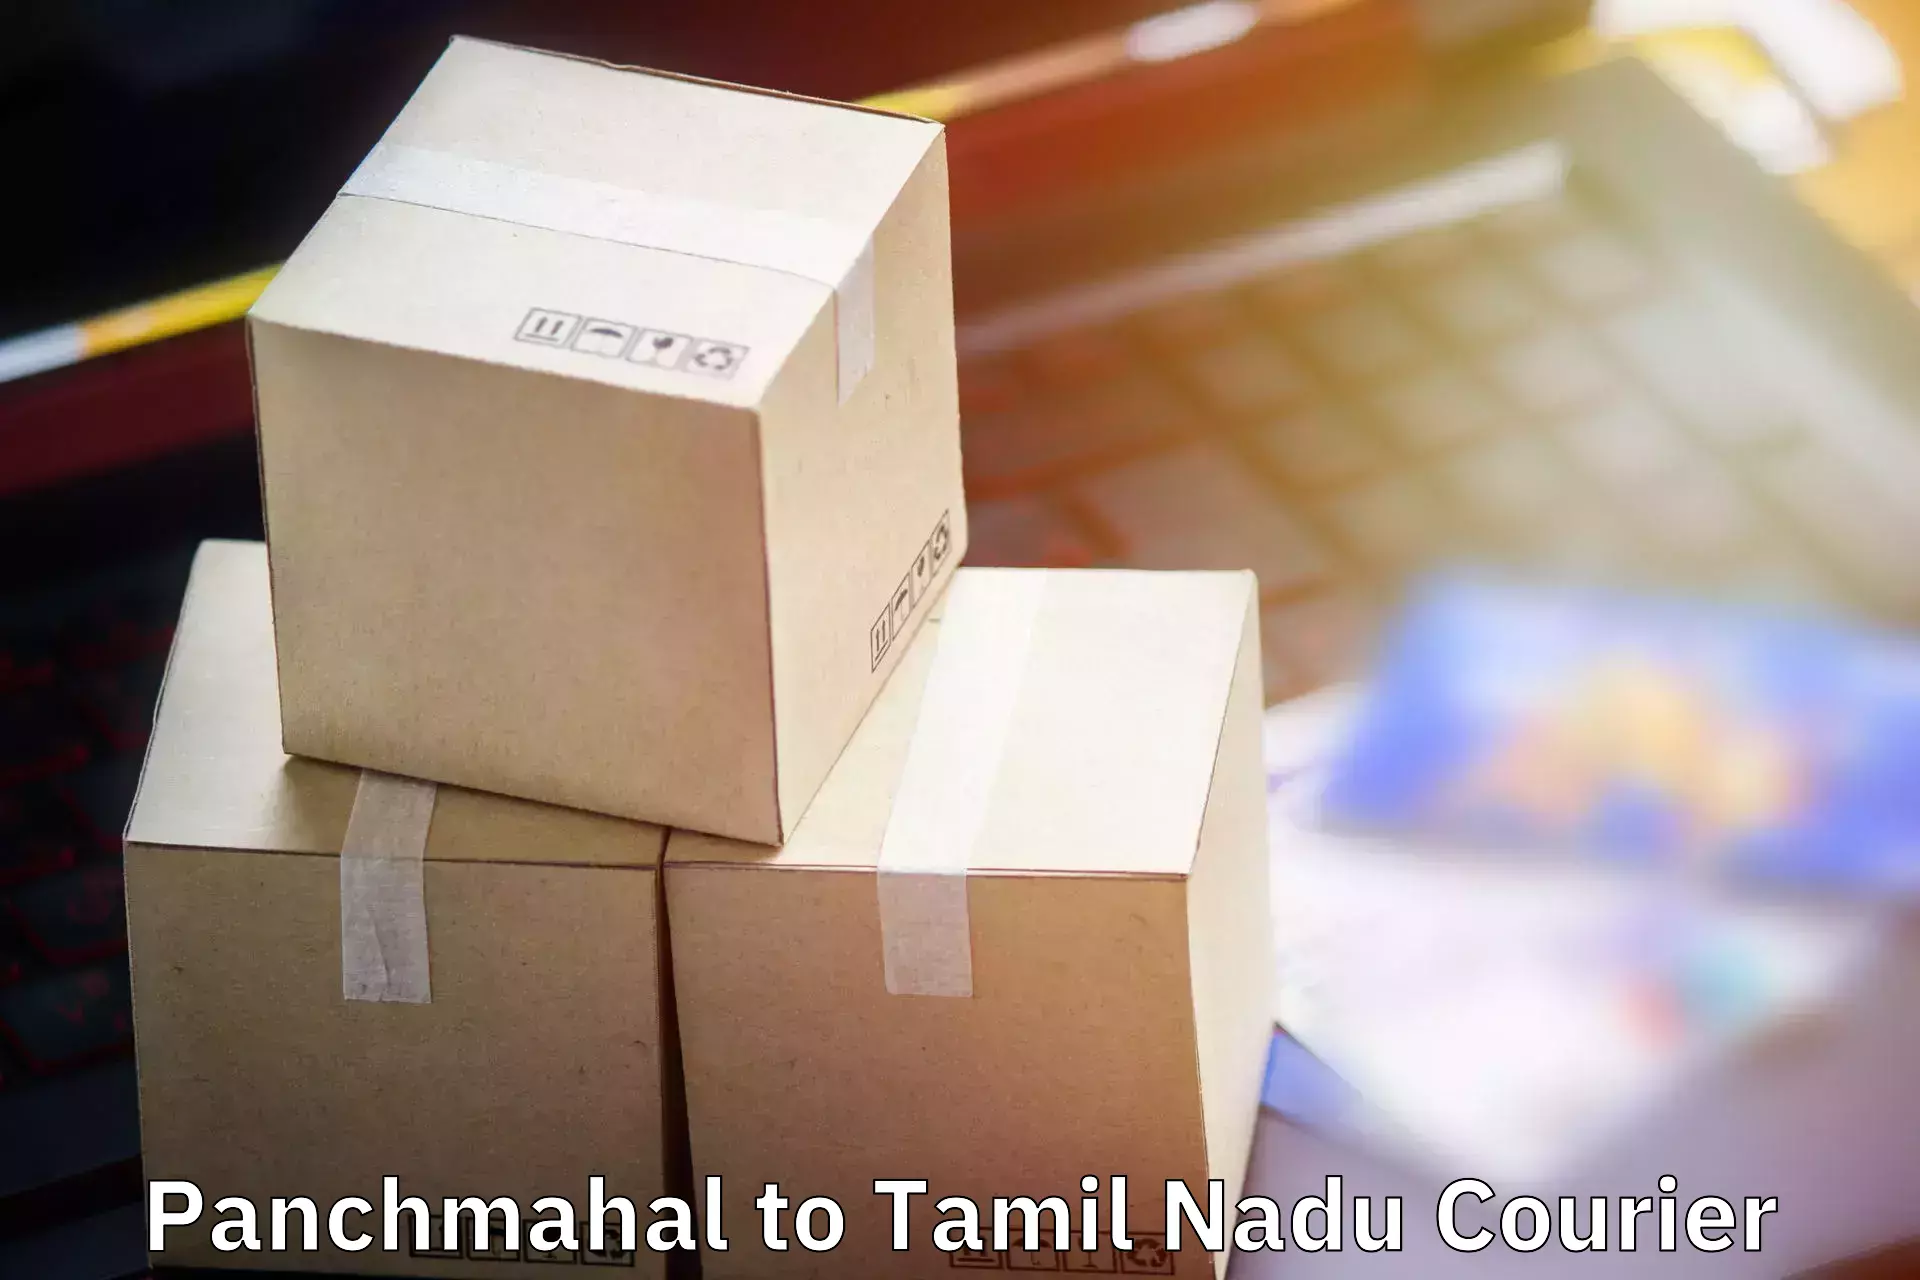 Personal effects shipping Panchmahal to Aruppukkottai